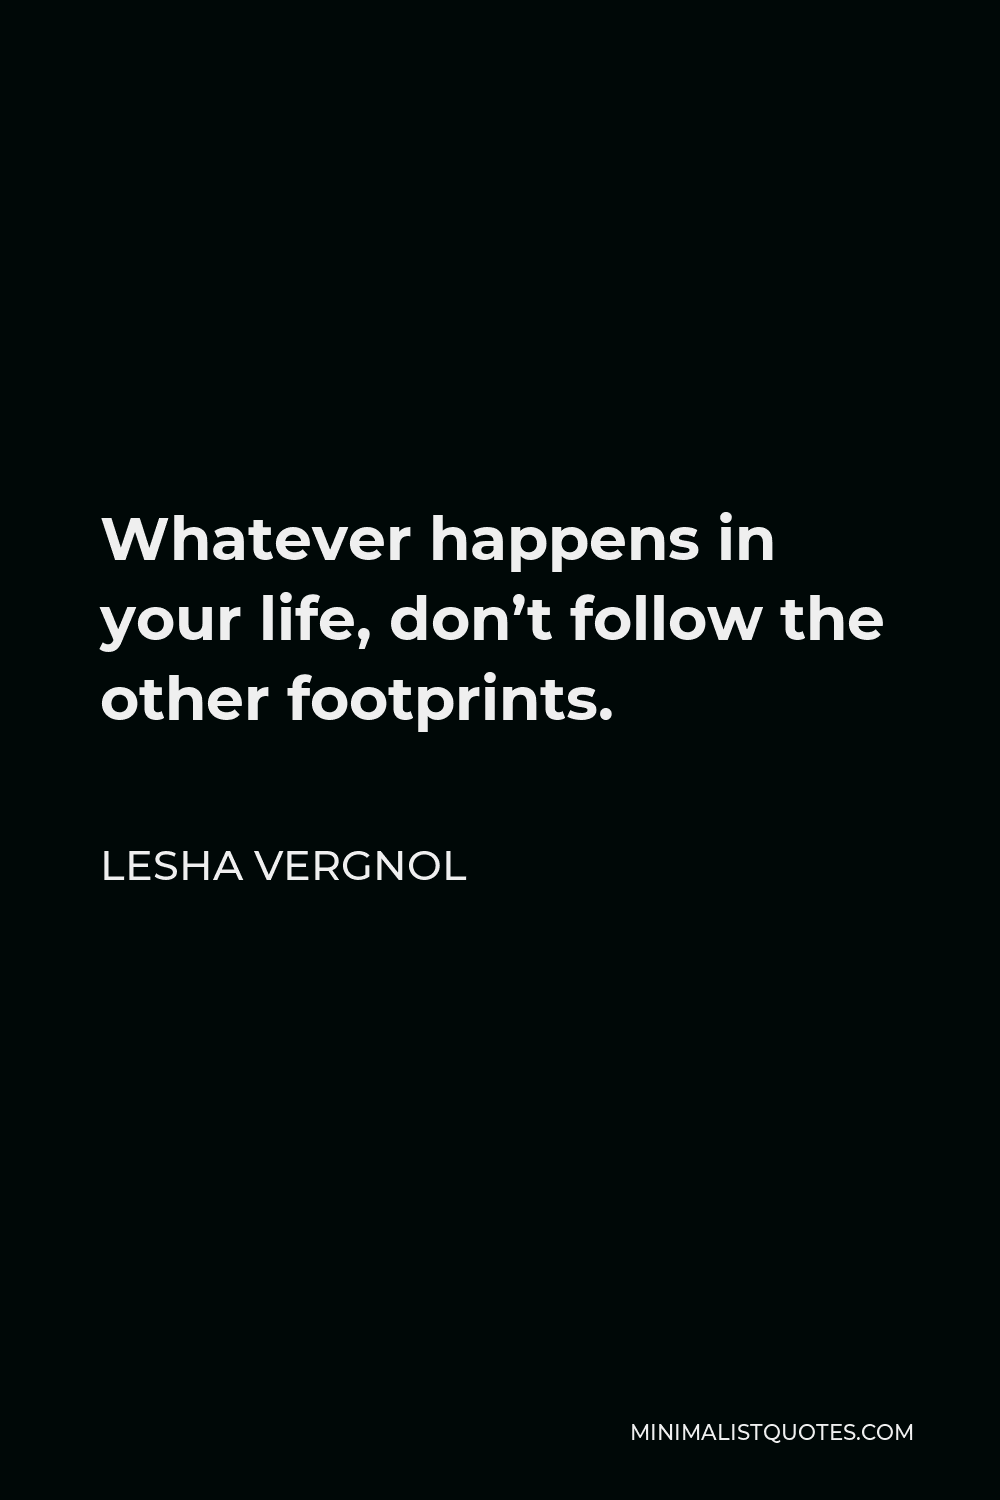 Lesha Vergnol Quote - Whatever happens in your life, don’t follow the other footprints.